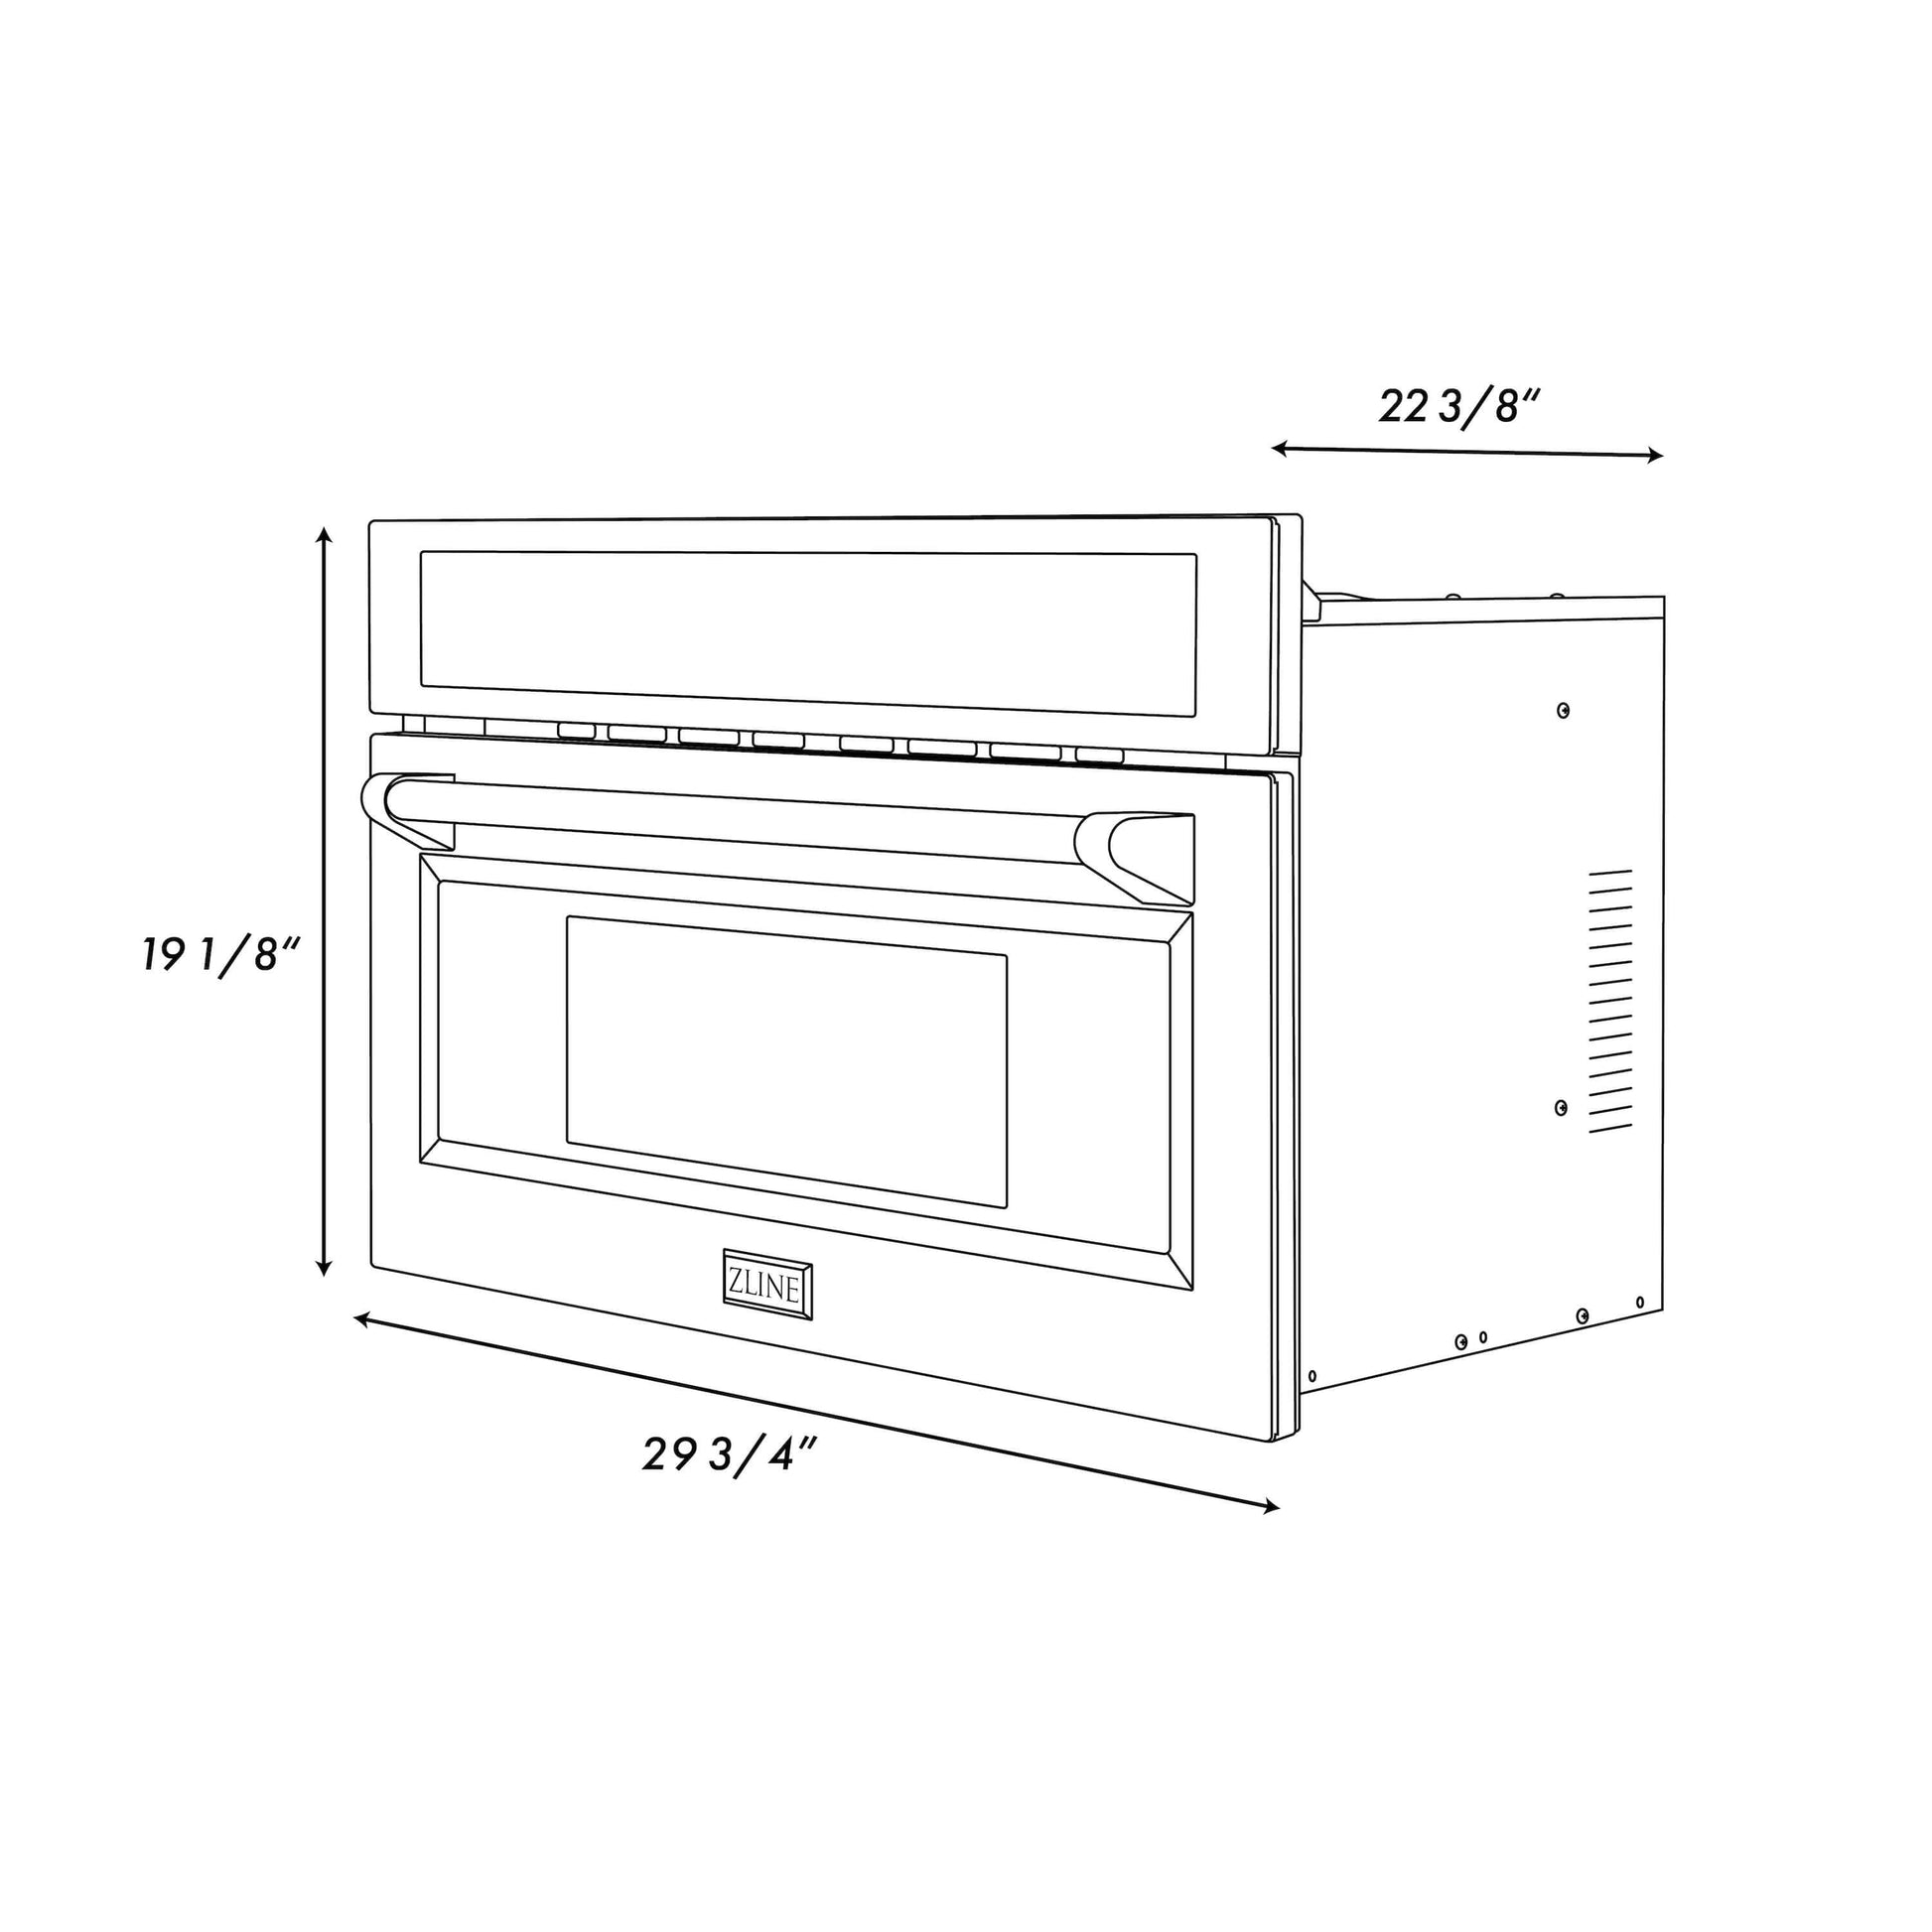 ZLINE 30 in. 1.6 cu ft. Stainless Steel Built-in Convection Microwave Oven (MWO-30) dimensional diagram with measurements.